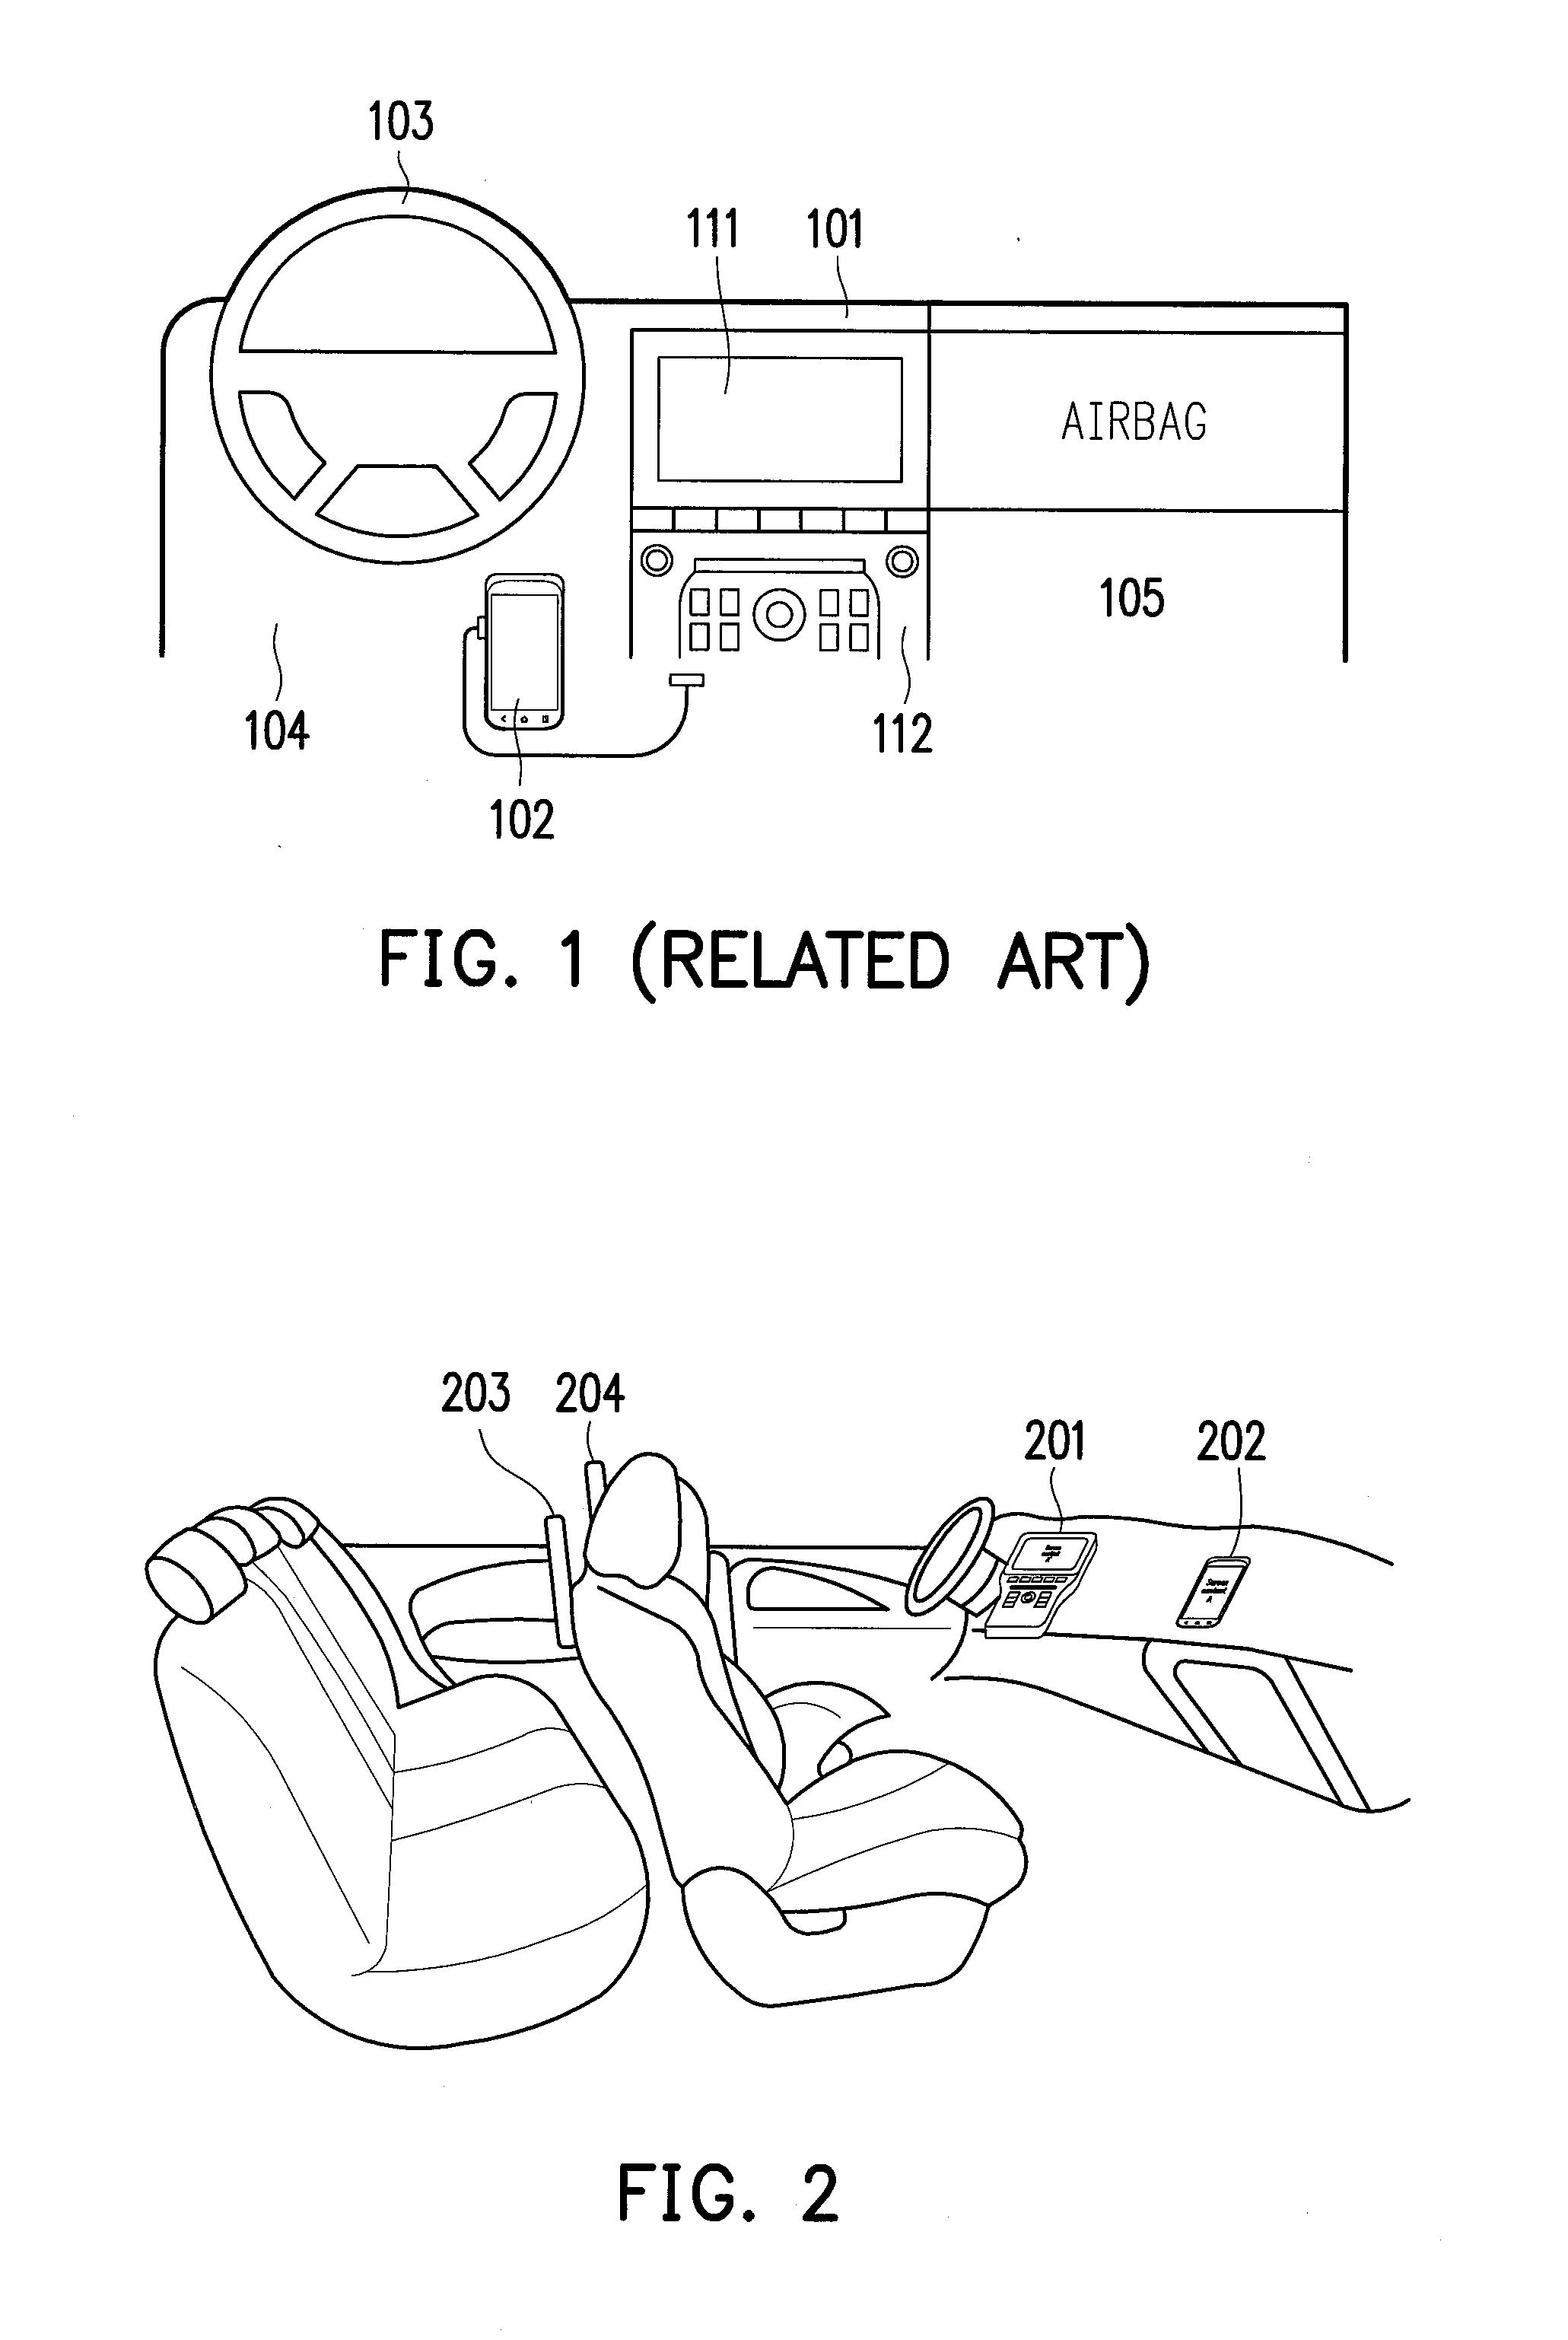 Method of controlling interaction between mobile electronic device and in-vehicle electronic system and devices using the same